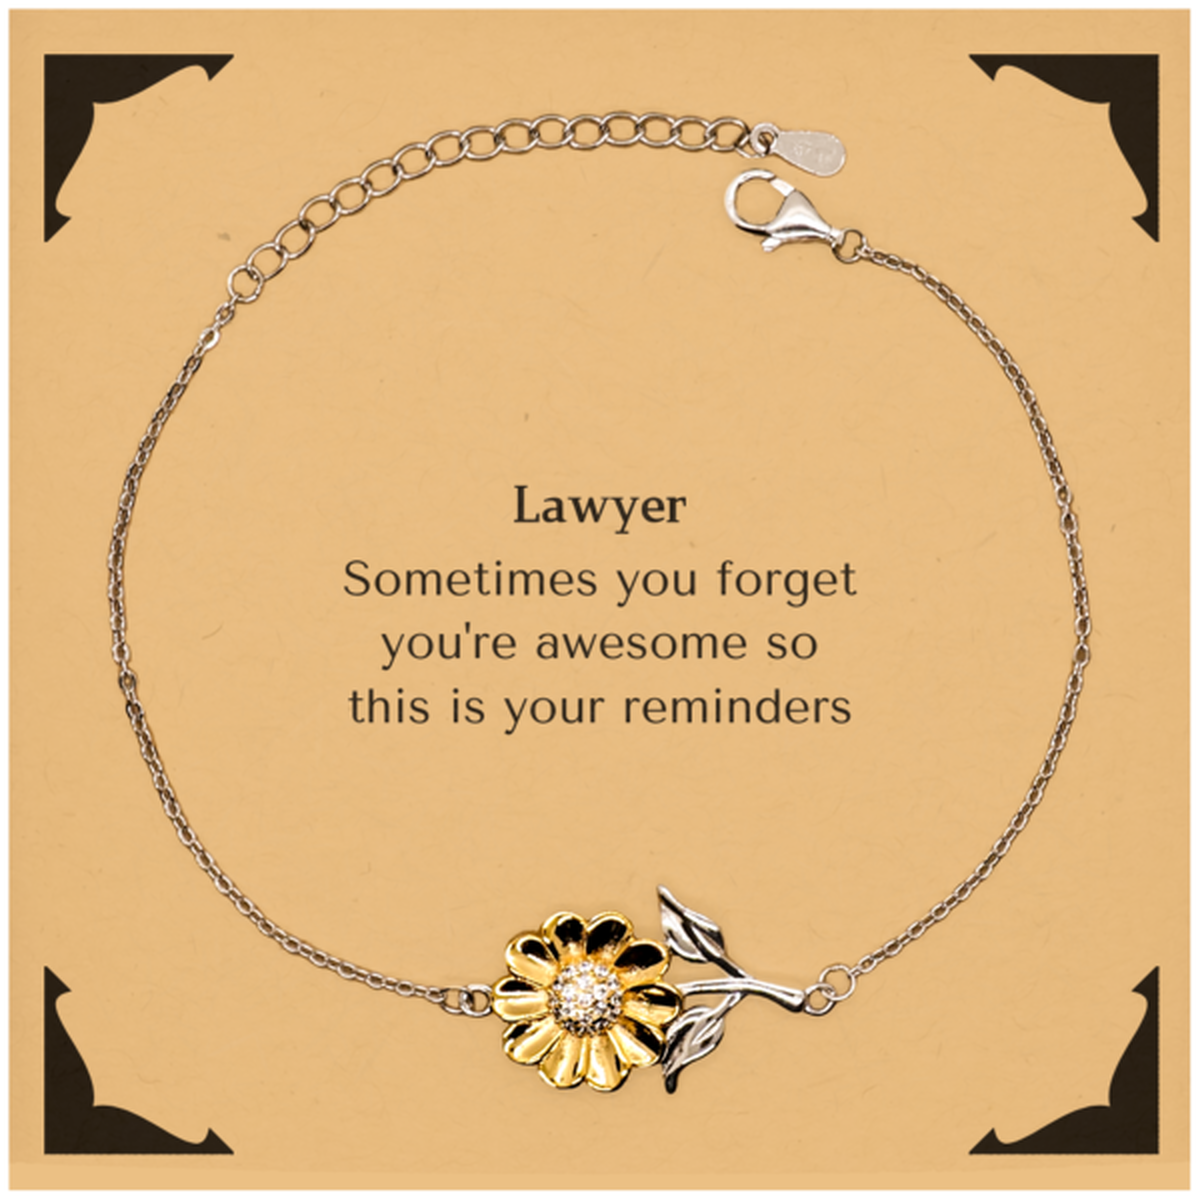 Sentimental Lawyer Sunflower Bracelet, Lawyer Sometimes you forget you're awesome so this is your reminders, Graduation Christmas Birthday Gifts for Lawyer, Men, Women, Coworkers